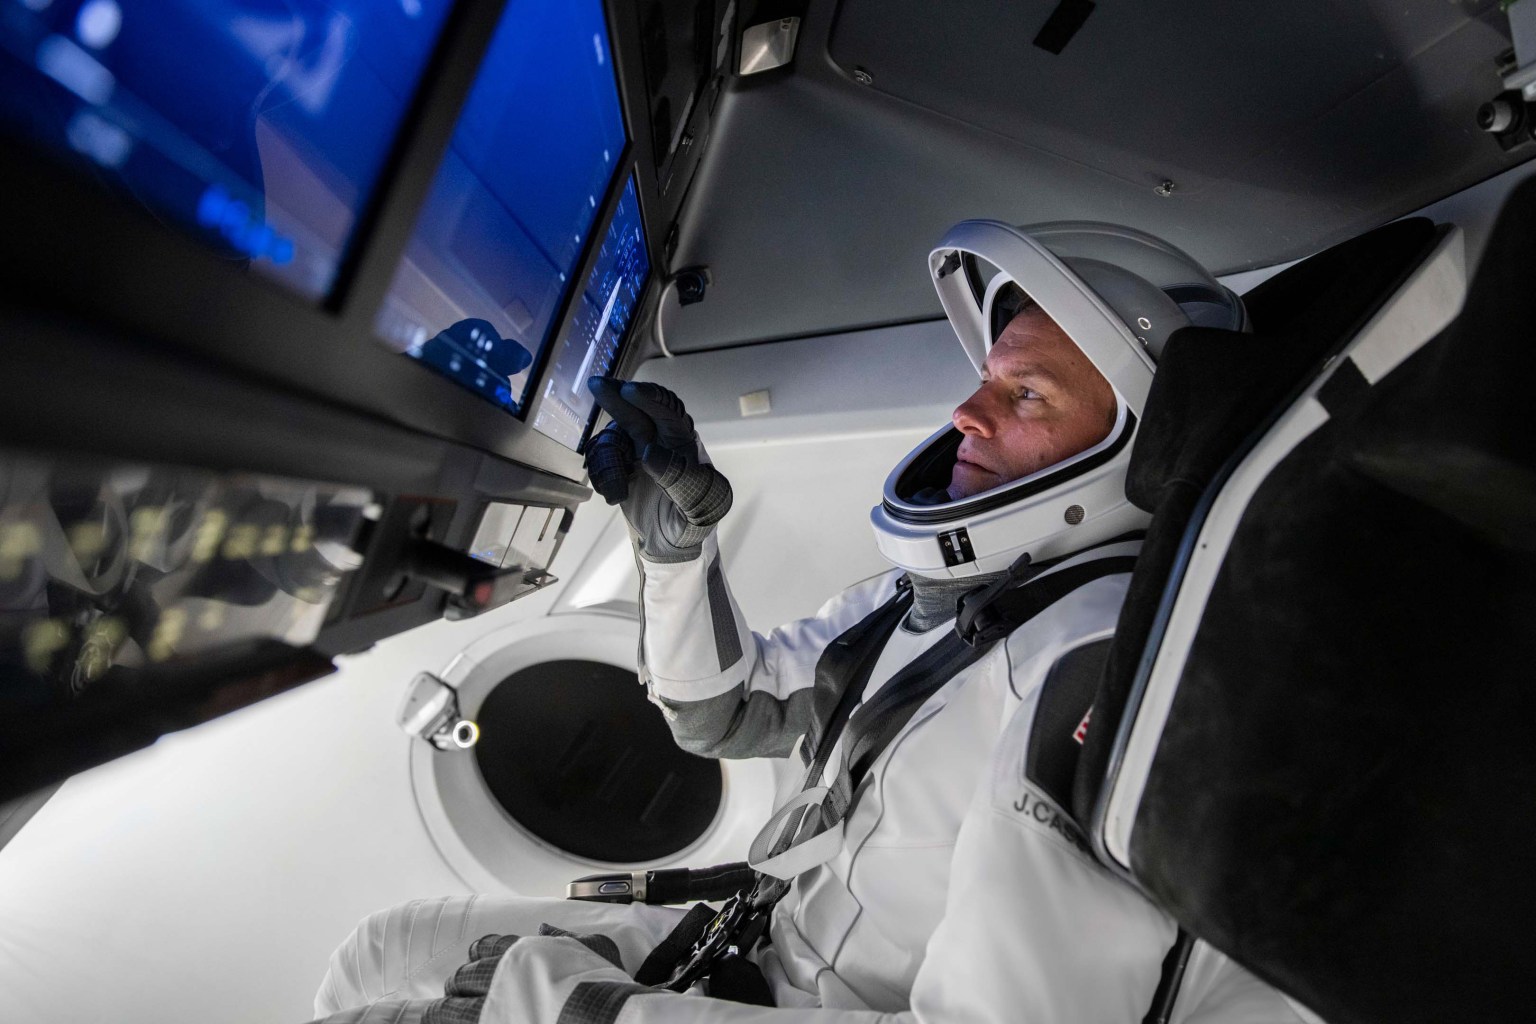 SpaceX Crew-5 Pilot Josh Cassada of NASA is pictured during a Crew Dragon cockpit training session at SpaceX headquarters in Hawthorne, California. 